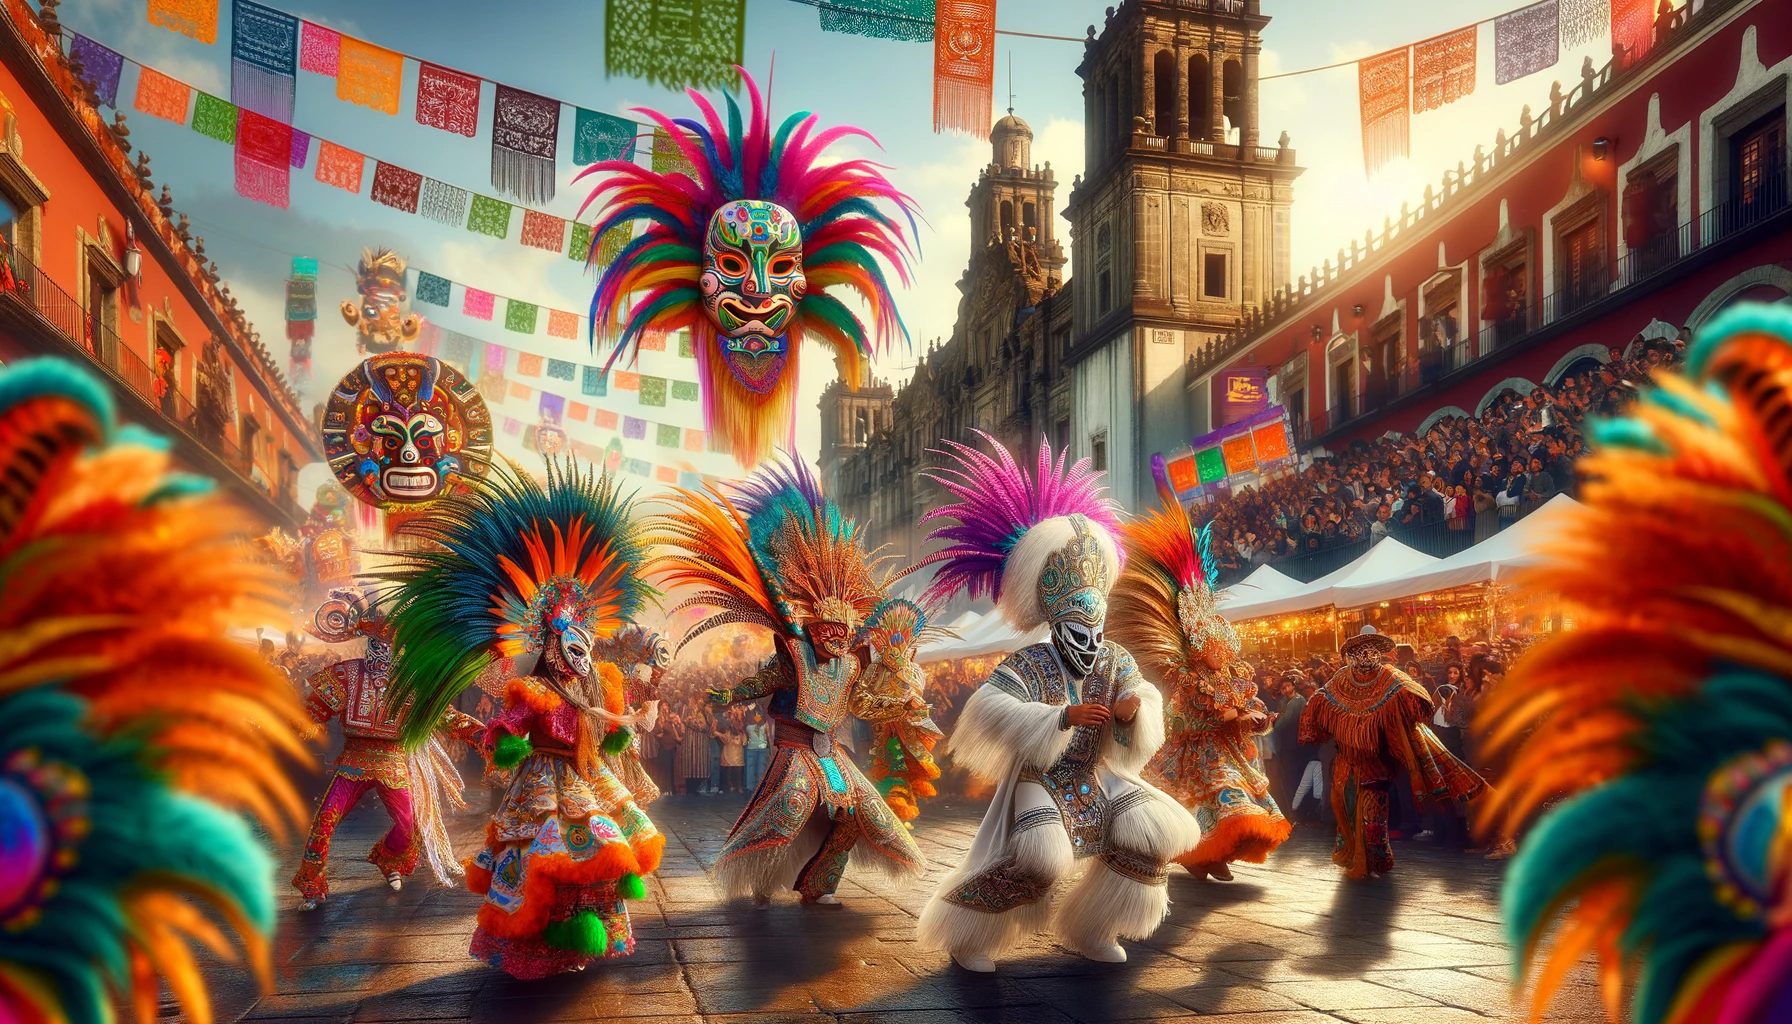 Colorful traditional Mexican festival dancers in costumes.